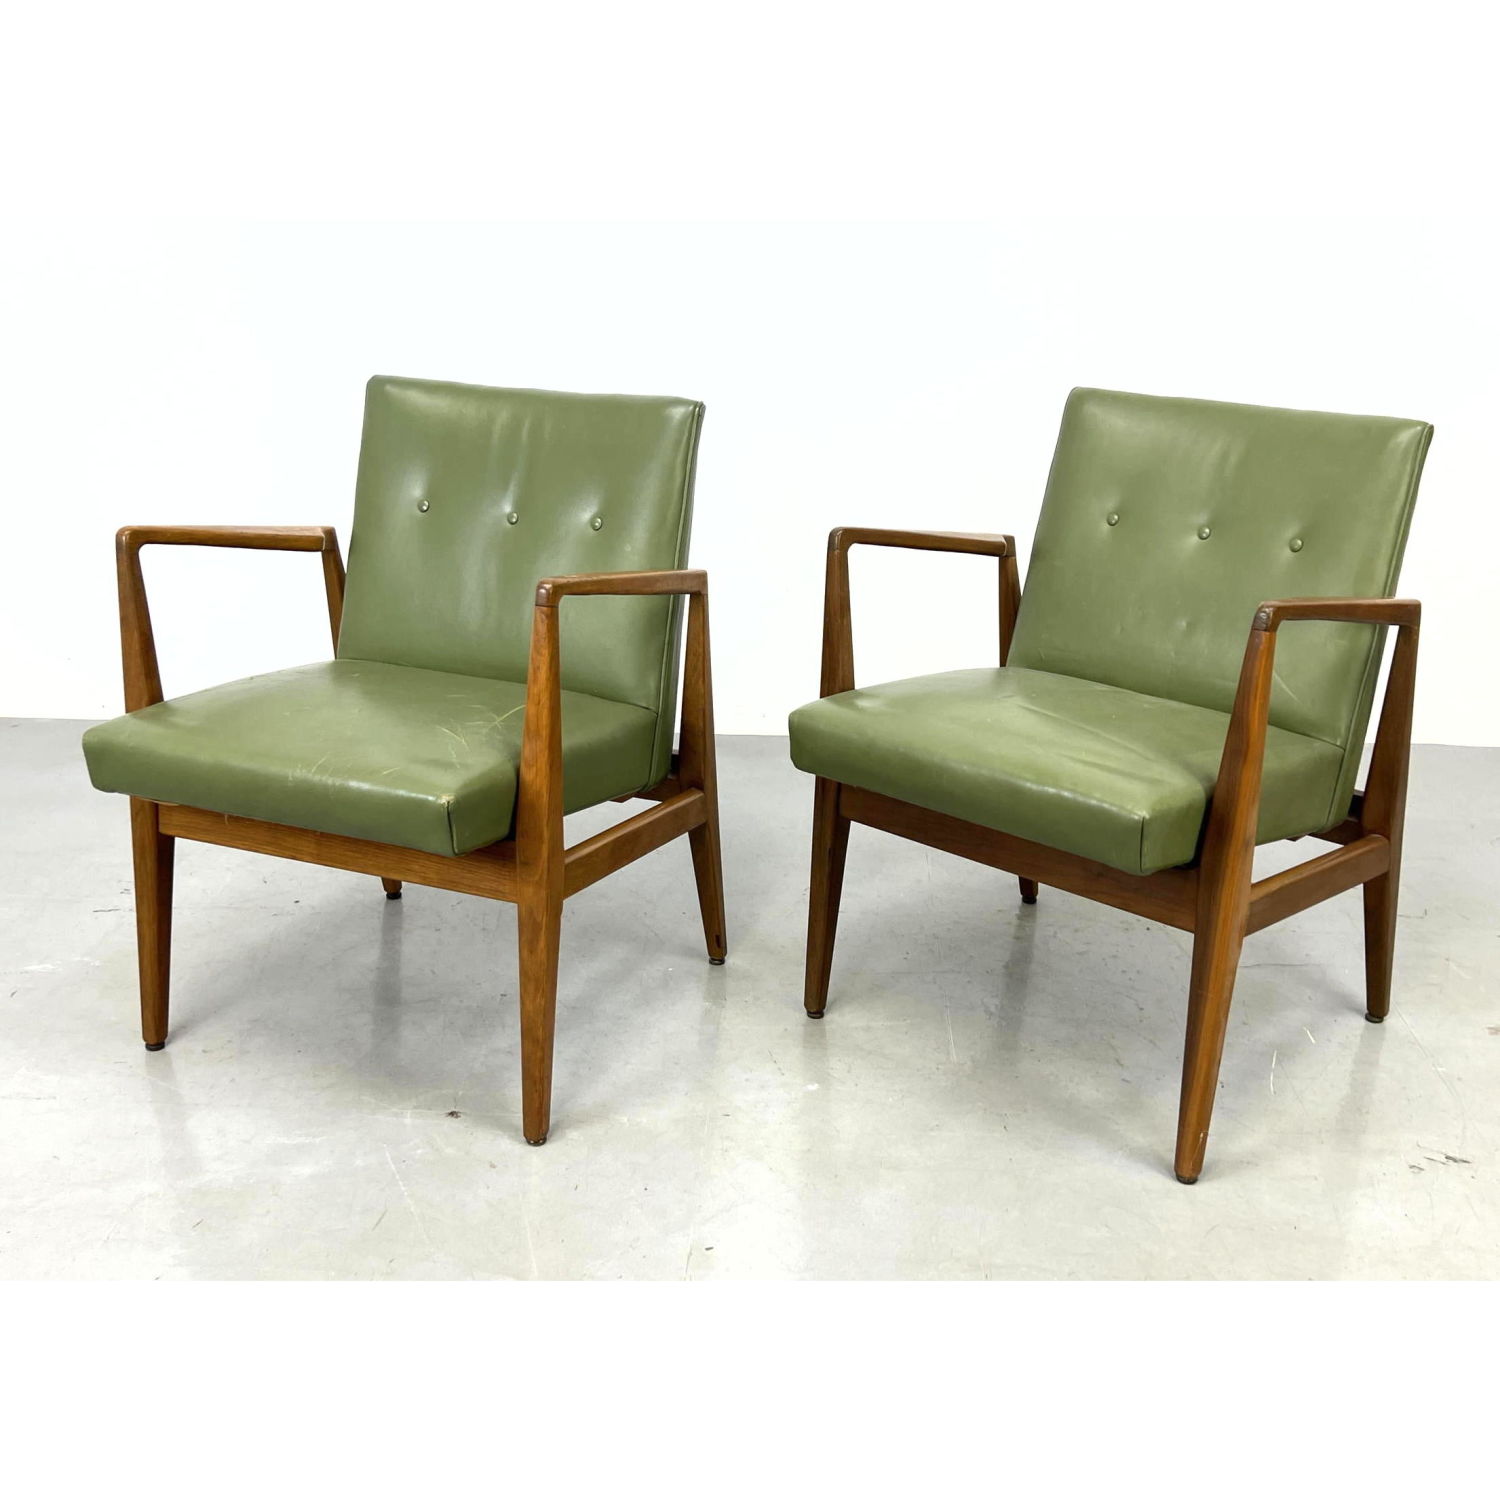 Pr Open Arm Lounge Chairs. Green